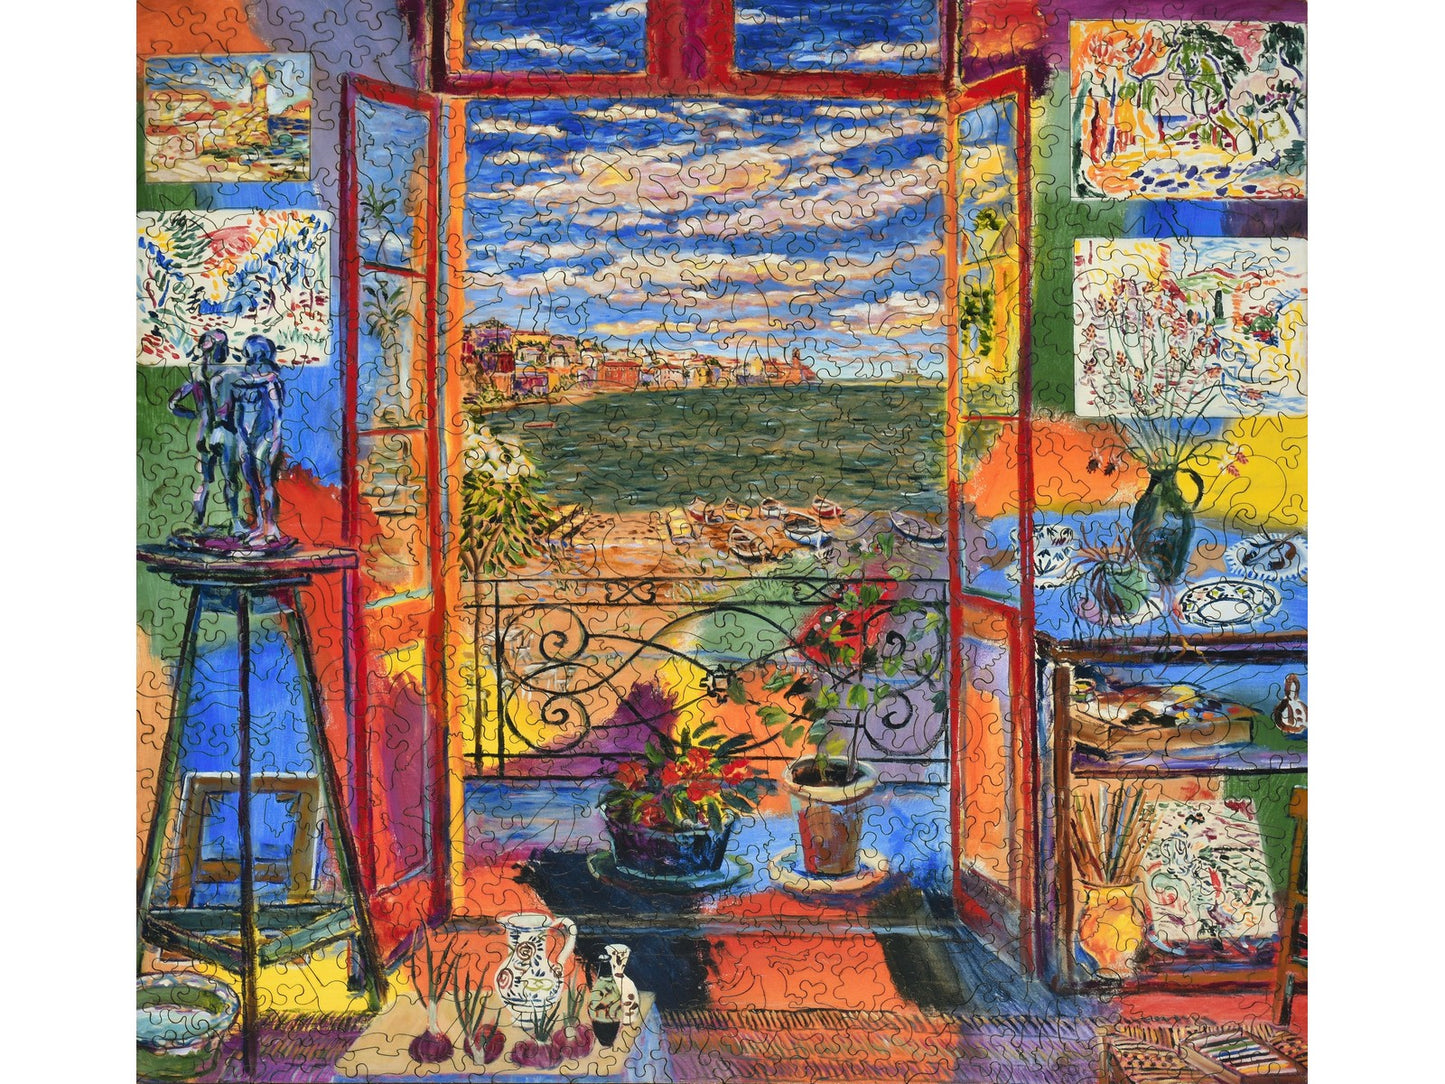 The front of the puzzle, Matisse's Studio, which shows an art studio with an ocean view.